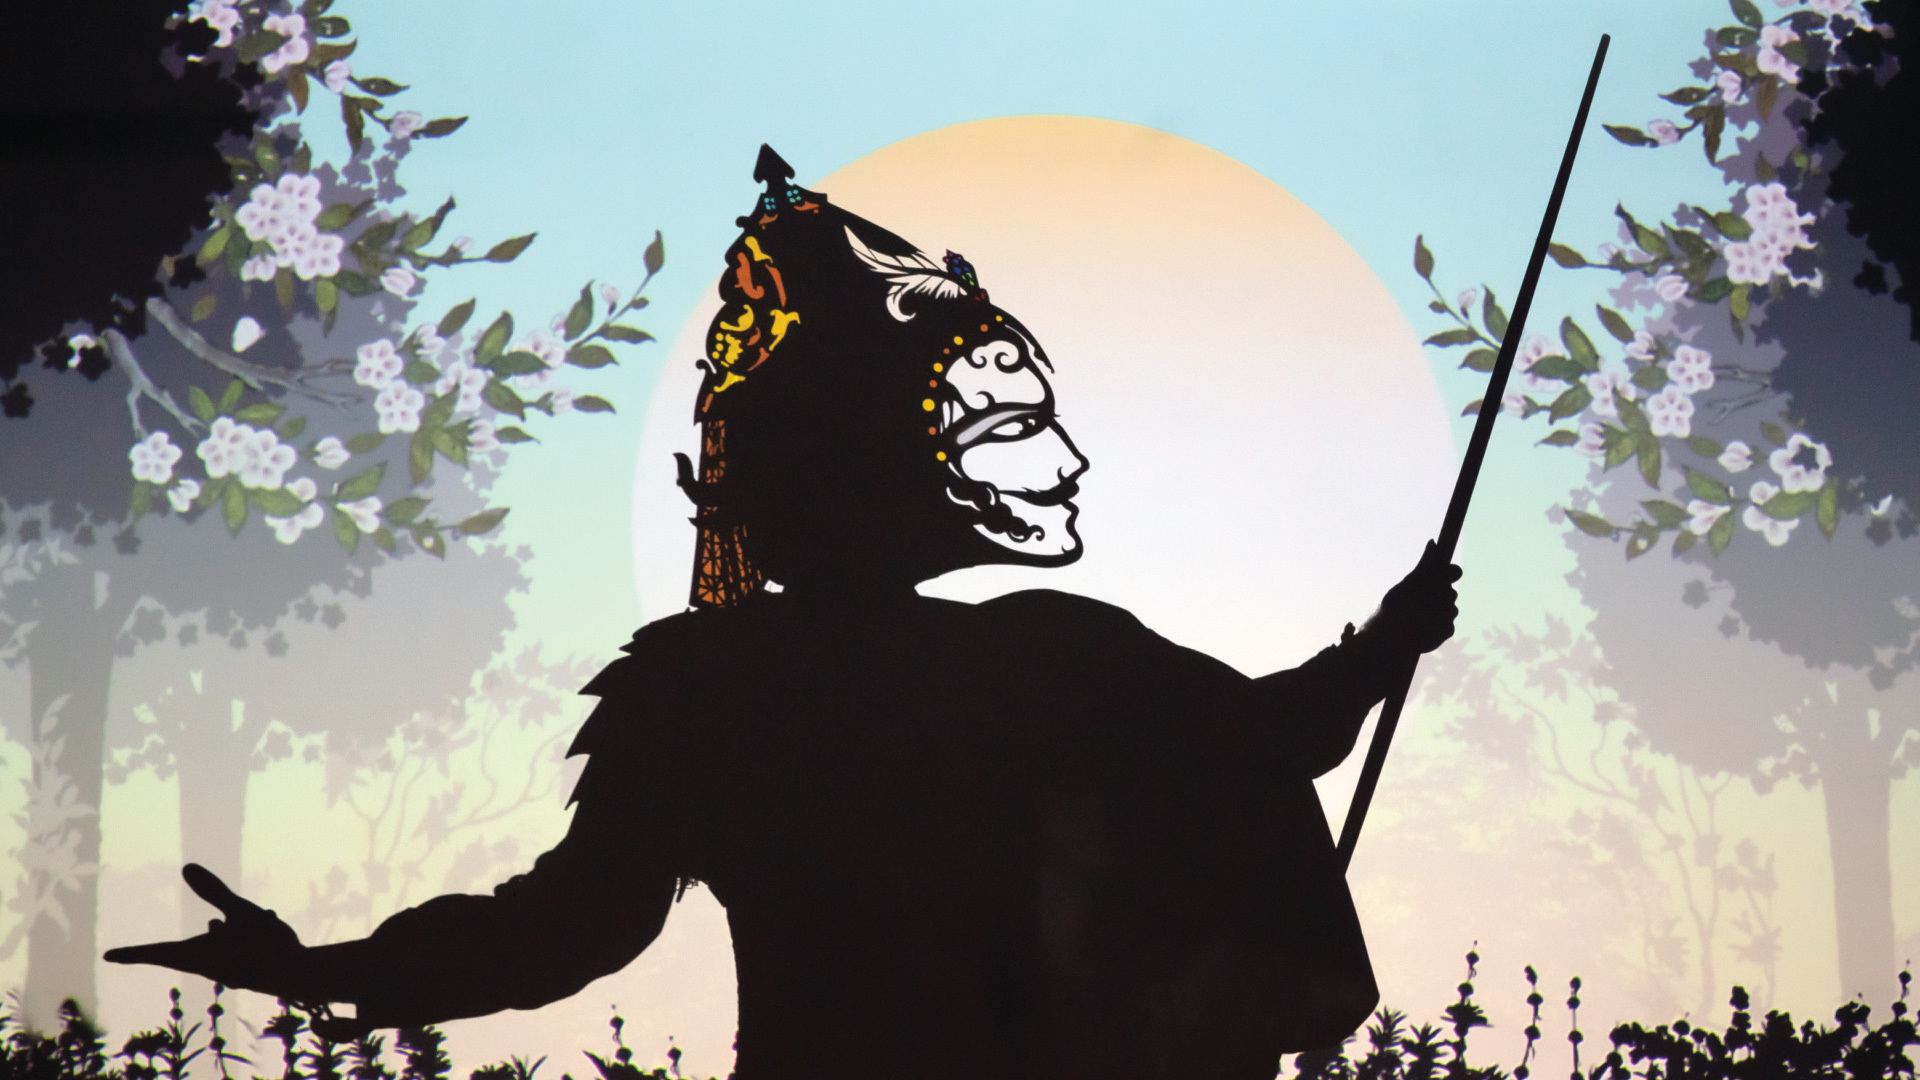 A performer wears a headpiece that casts a shadow of a face against a projection of trees and the sun.